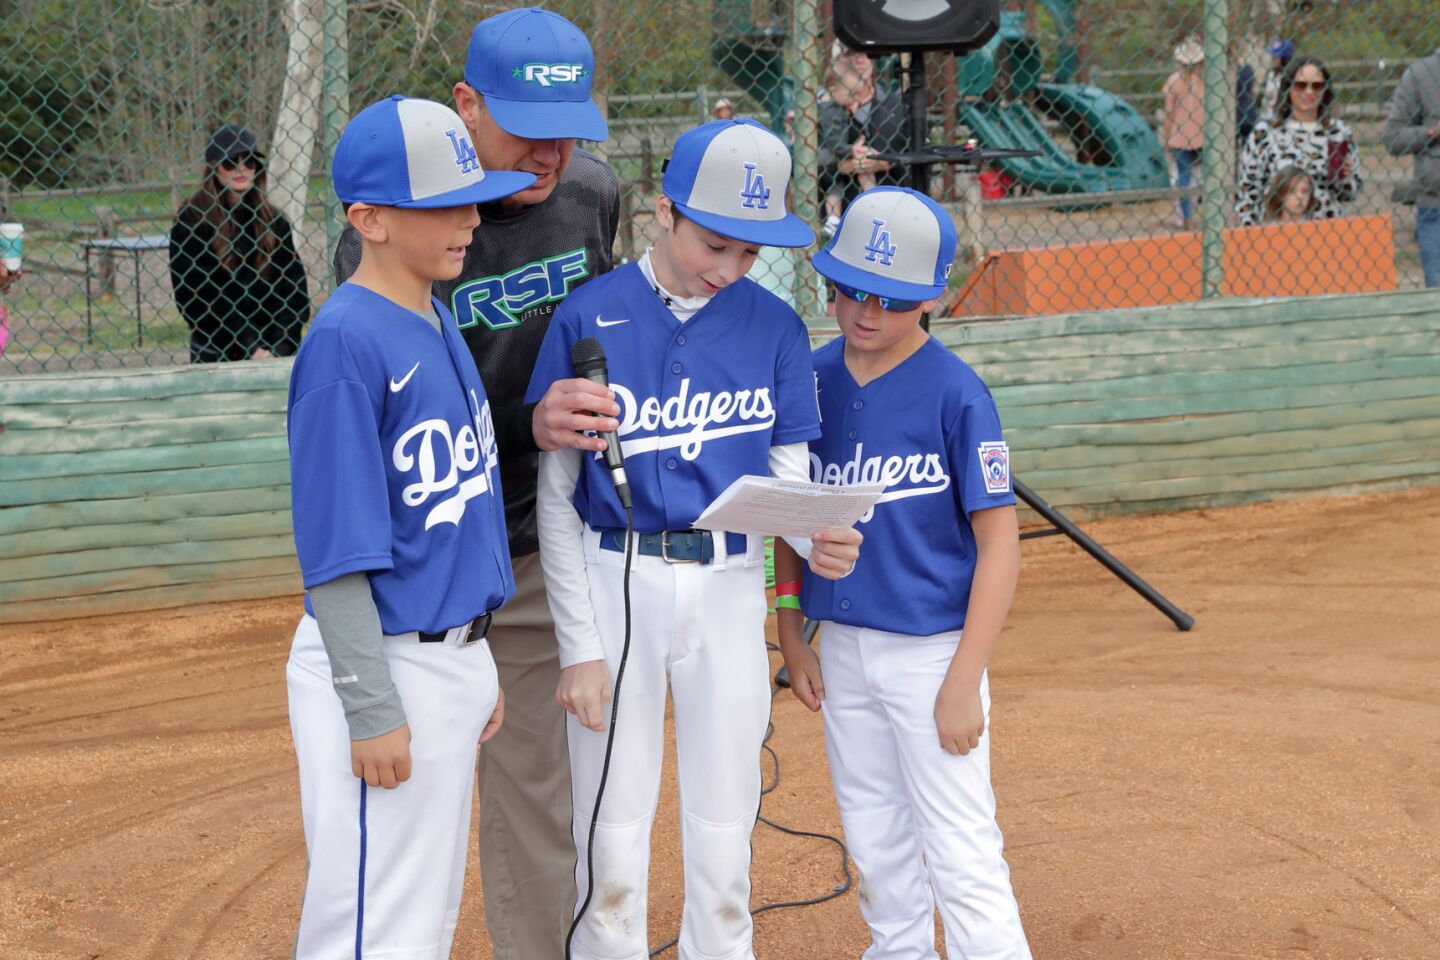 RSFLL President Bob Willingham and 3 majors players read the Little League Pledge